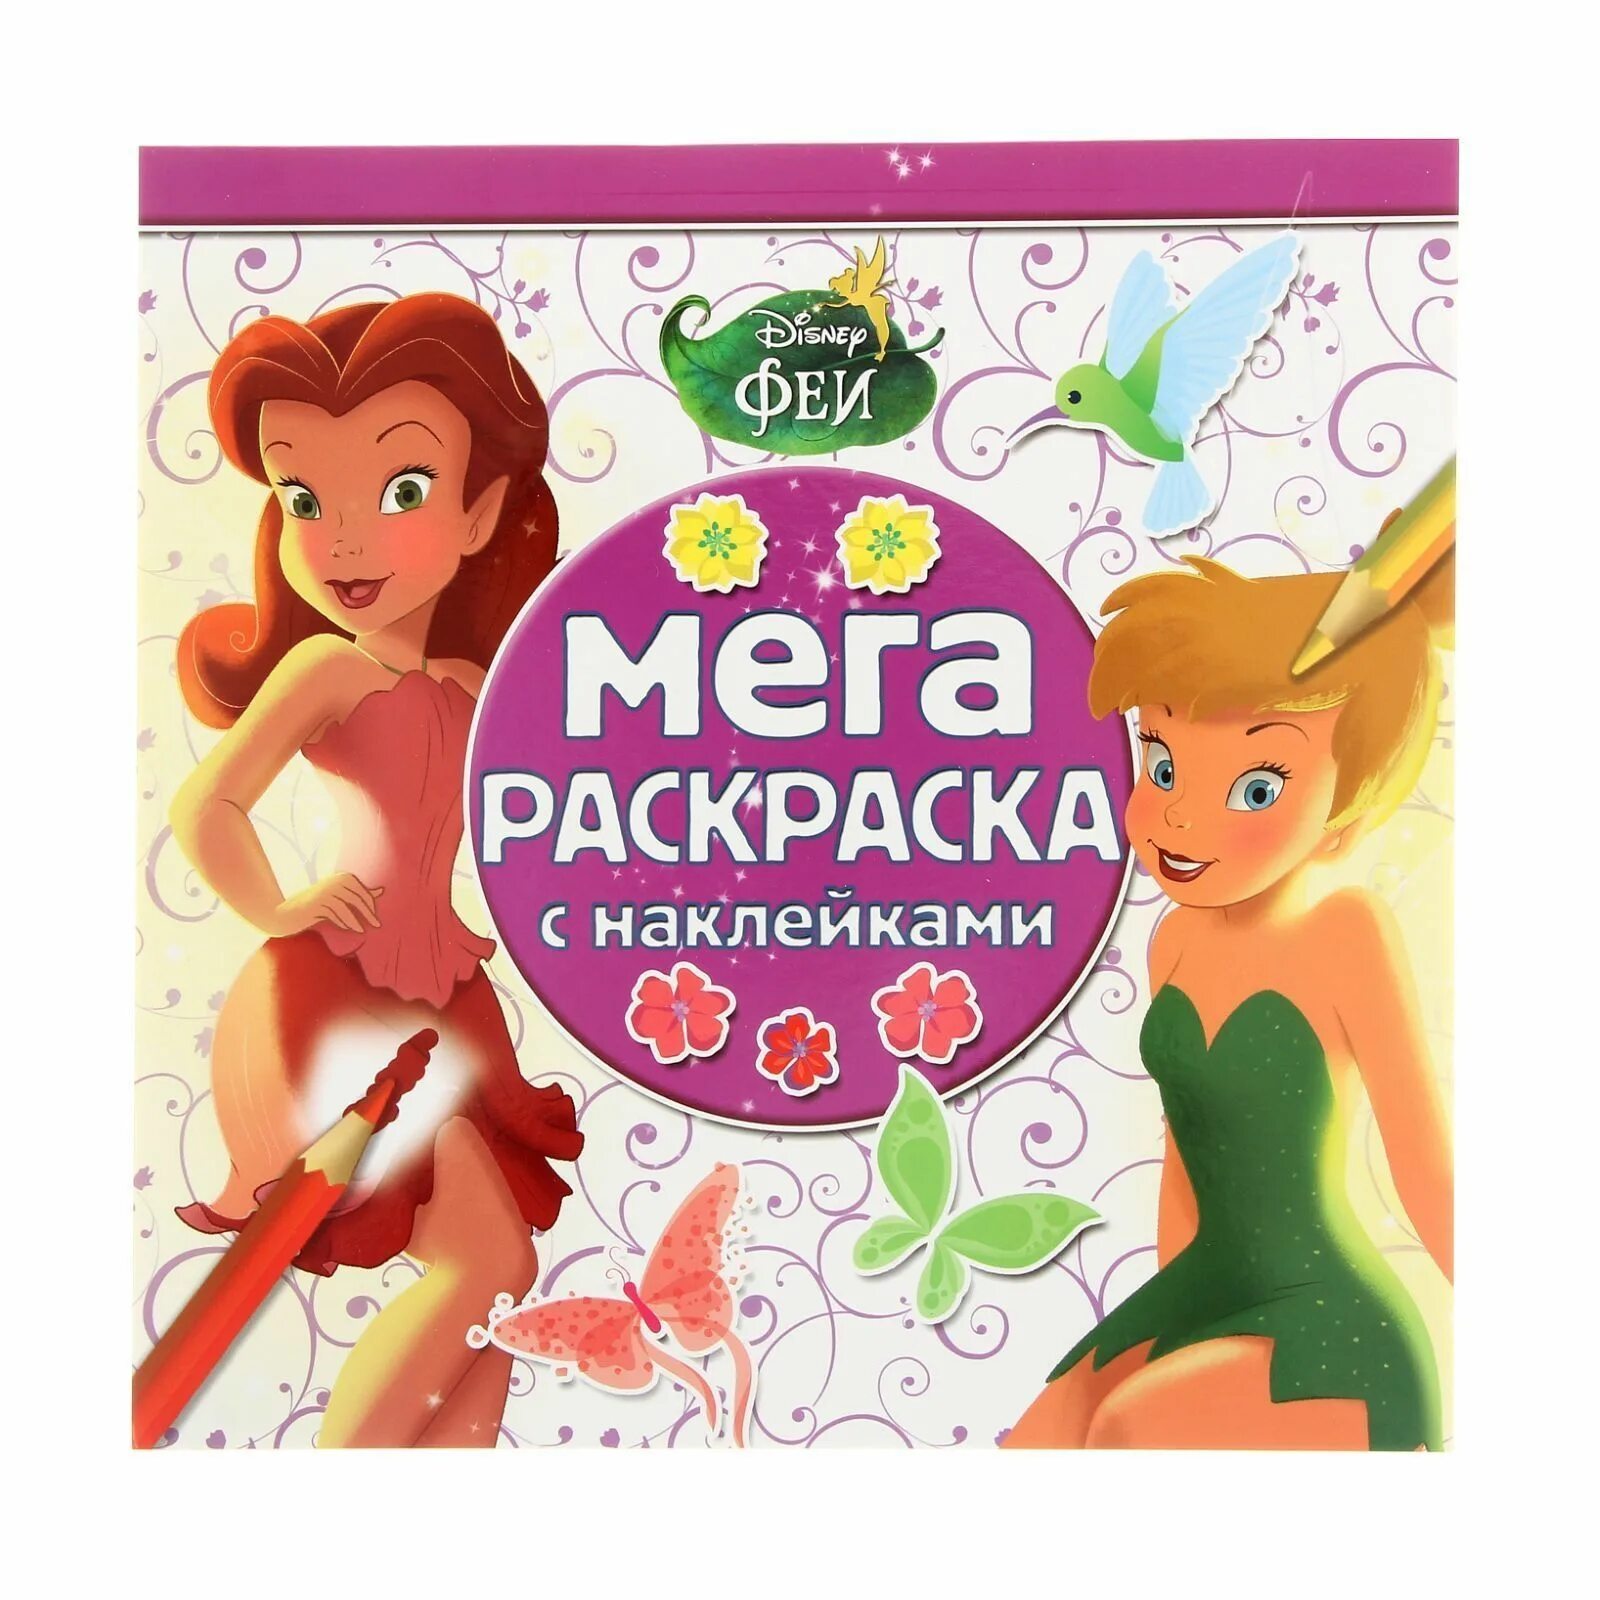 Disney fairies with stickers #6